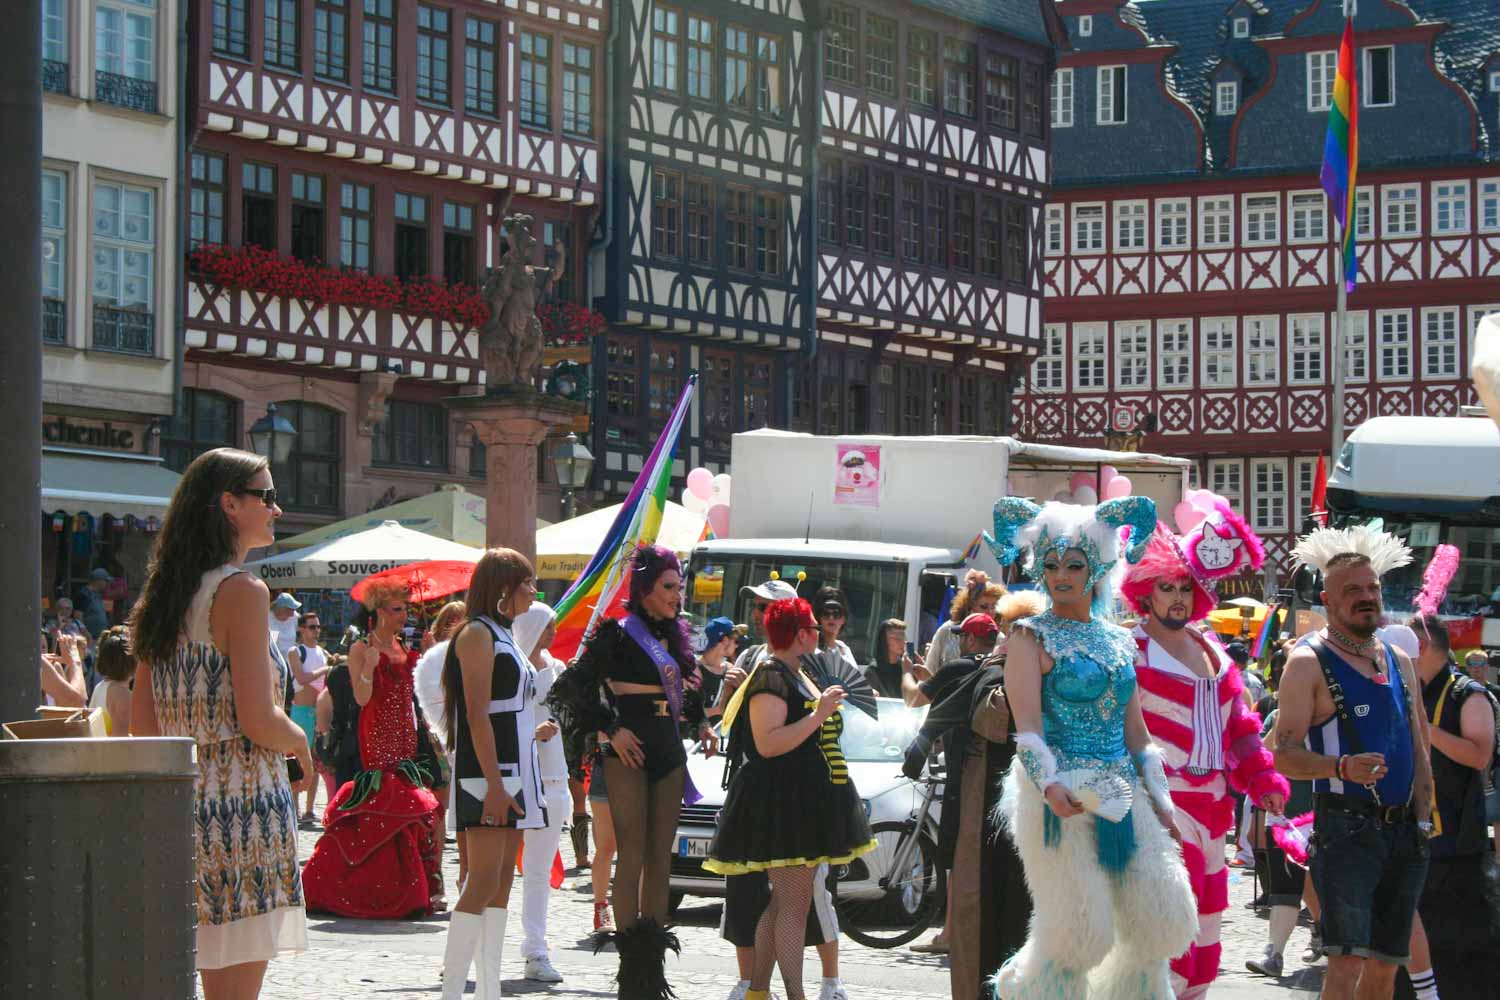 People dressed in colourful costumes at a gay pride event